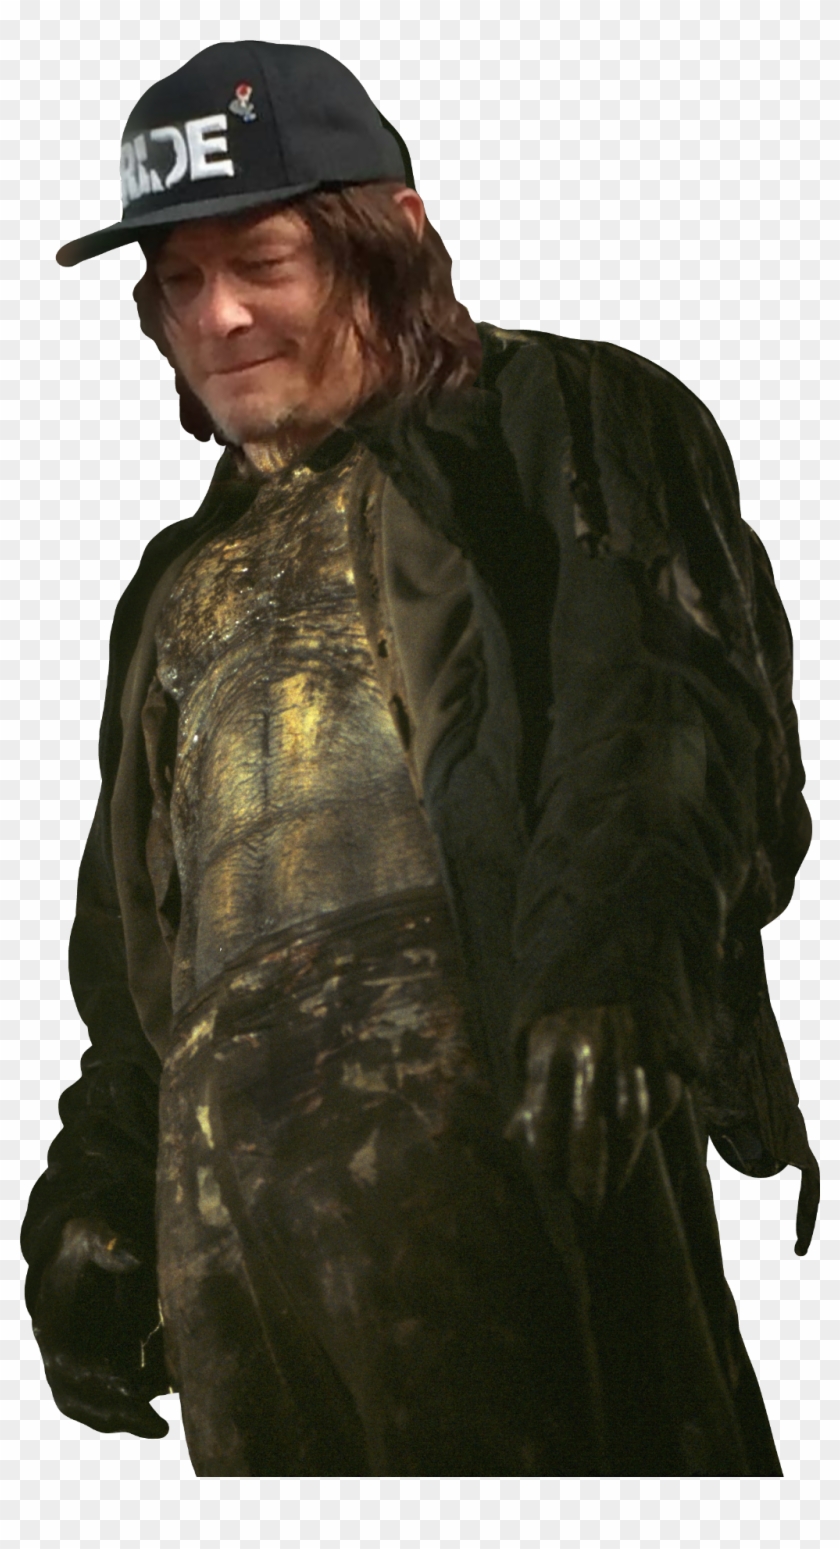 #twd #jeeperscreepers #reedus #norman #daryl #dixon - Soldier Clipart #2452847